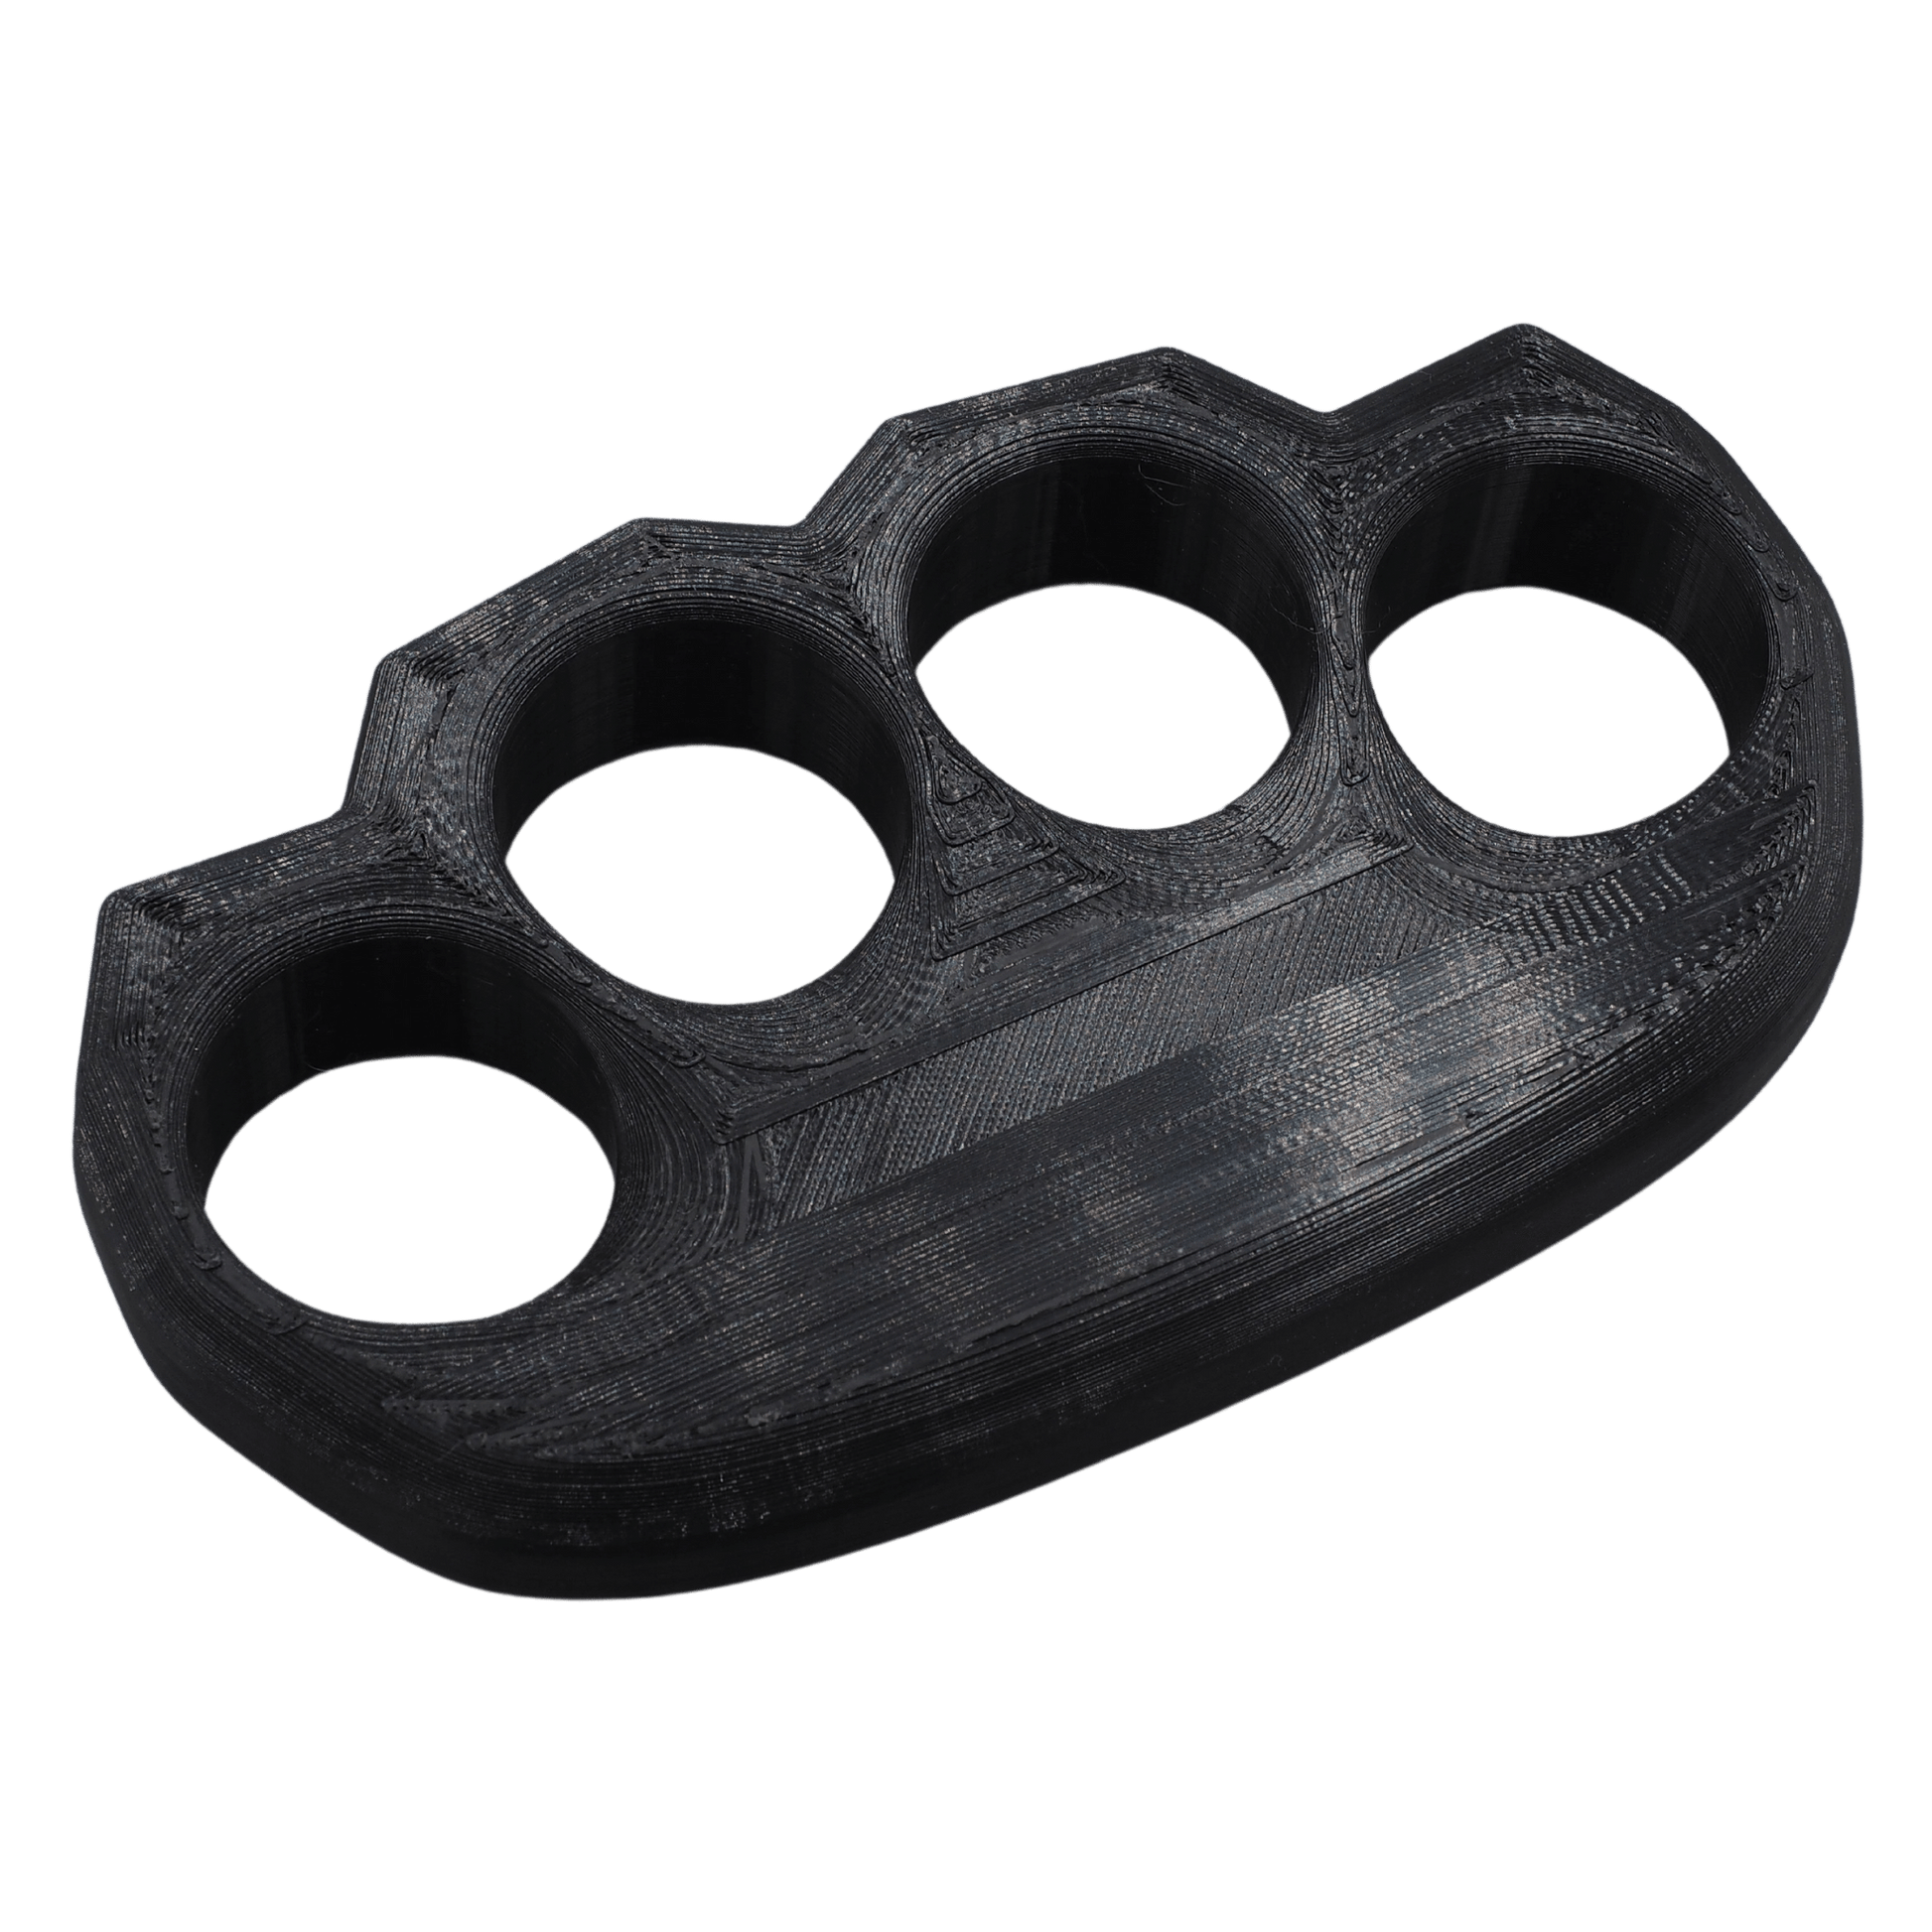 Black Plastic Knuckle Duster - Fist-Loading Weapon - Brass Knuckles